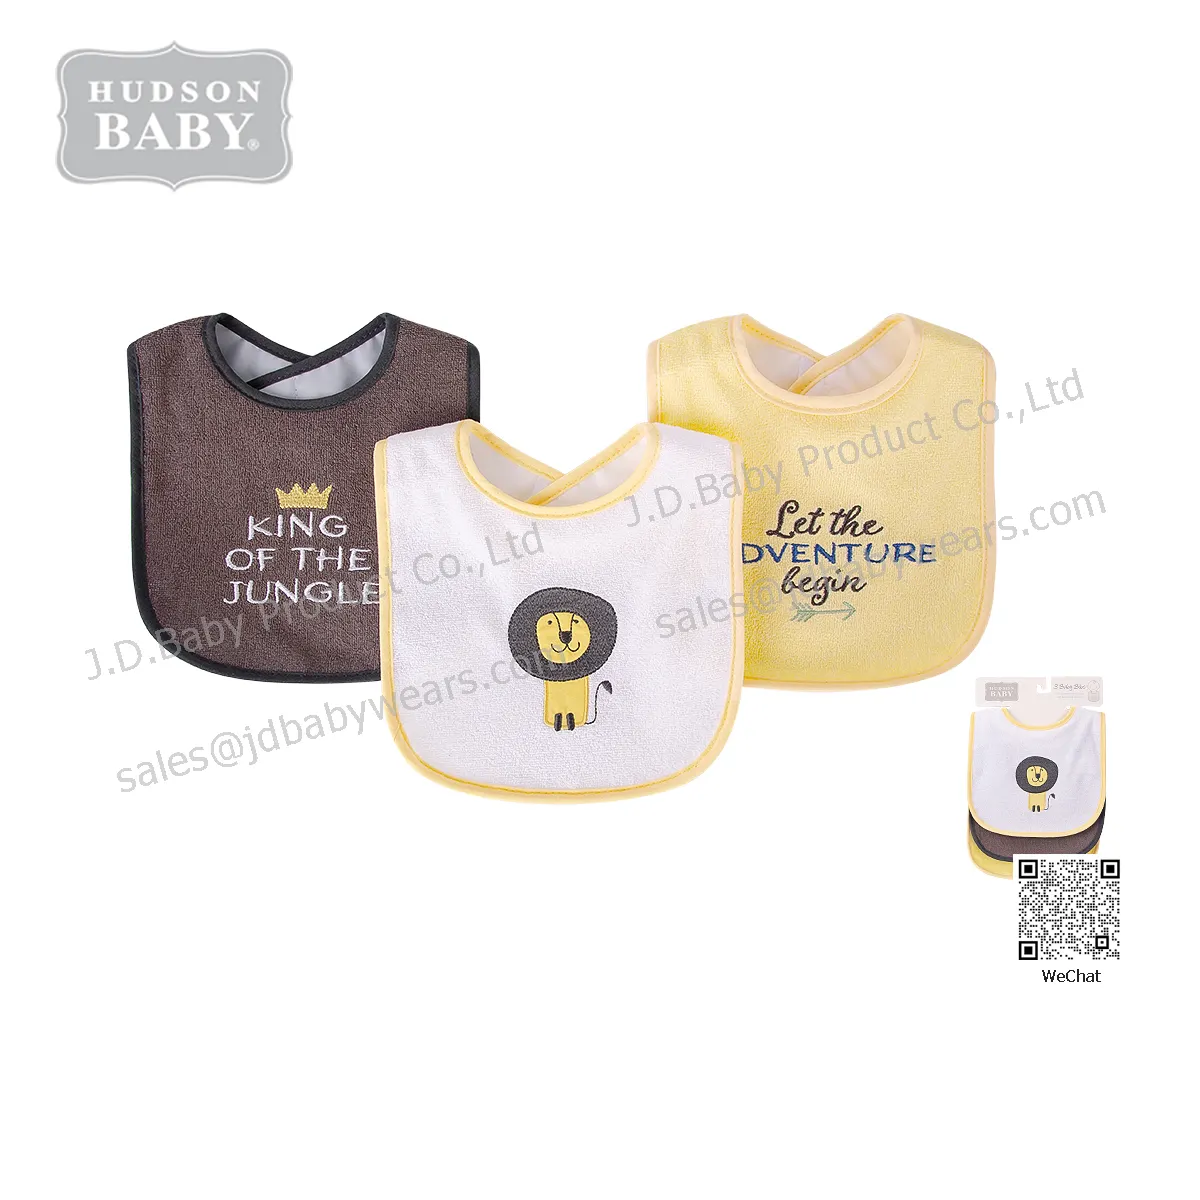 Customized double cotton and PEVA waterproof baby bib, soft baby feeding easy to clean bib brand of H u d s o n Baby